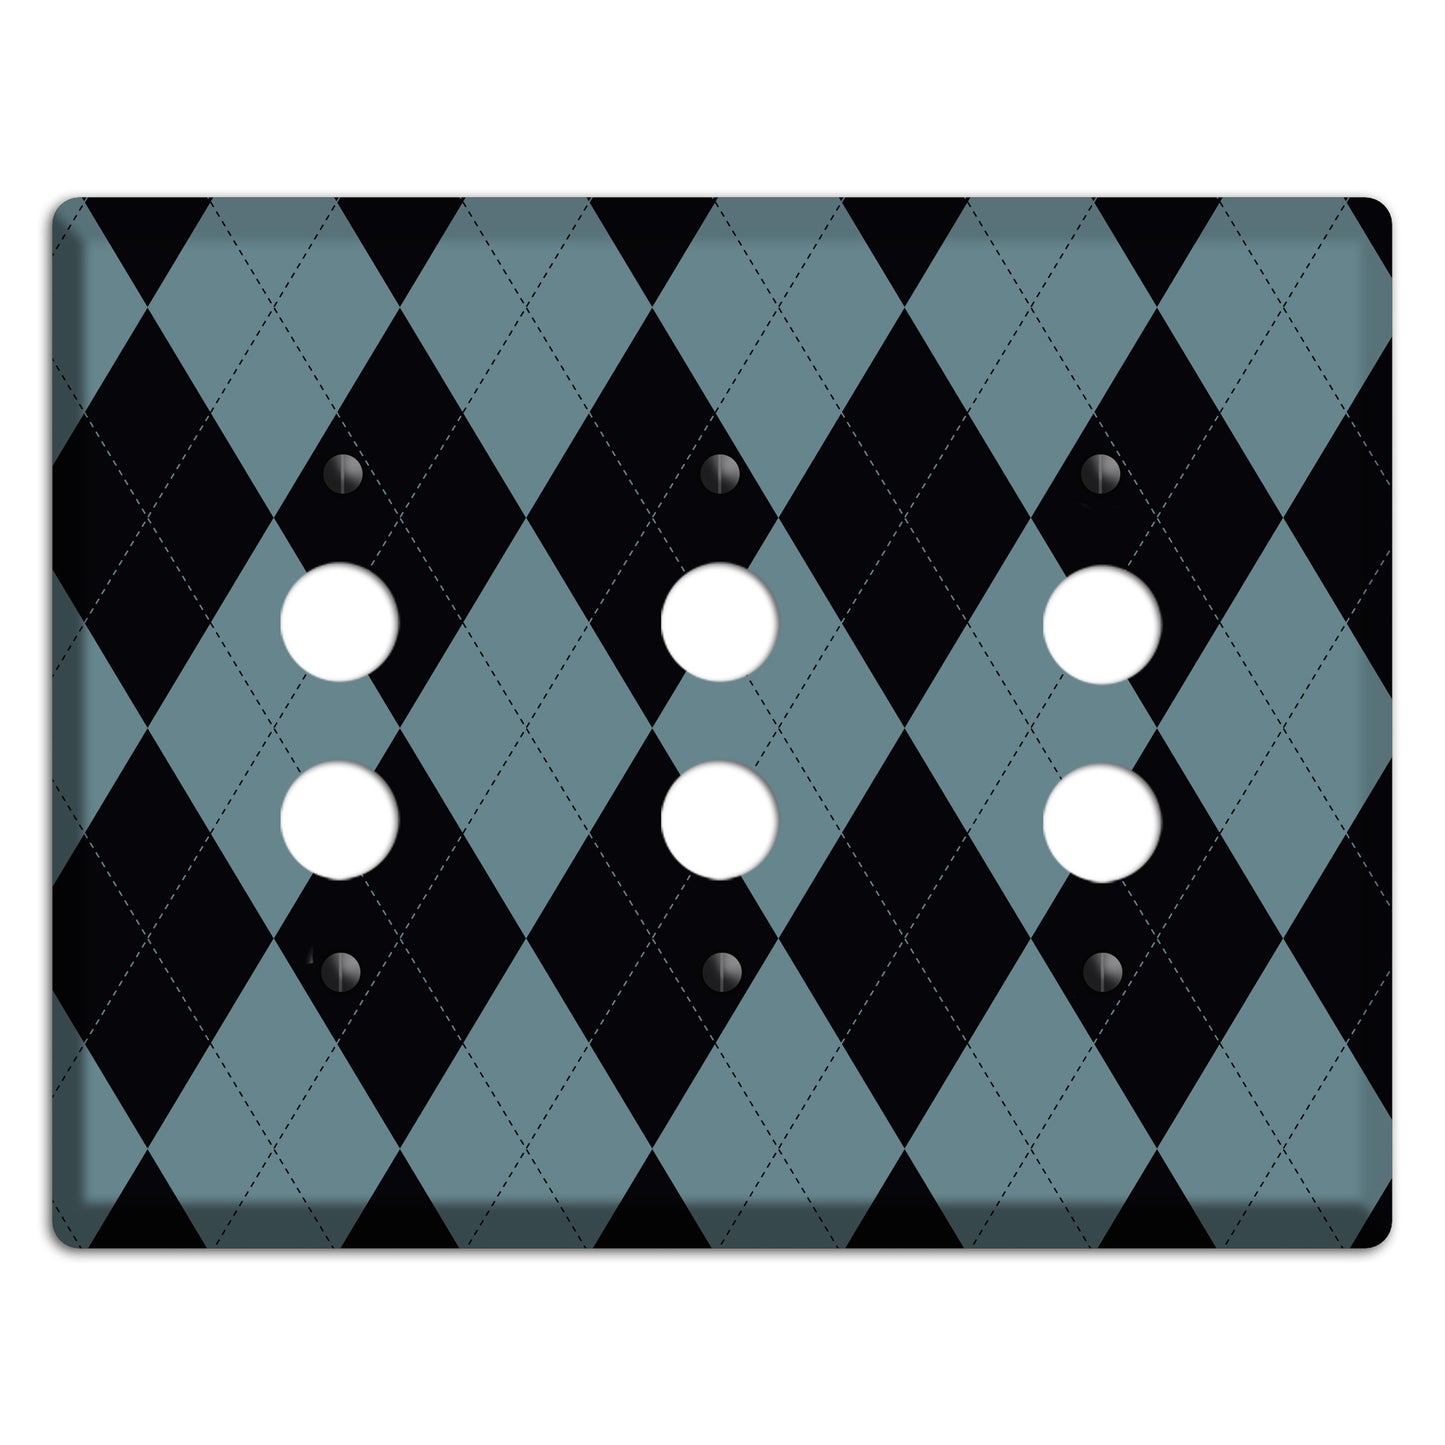 Blue and Black Argyle 3 Pushbutton Wallplate